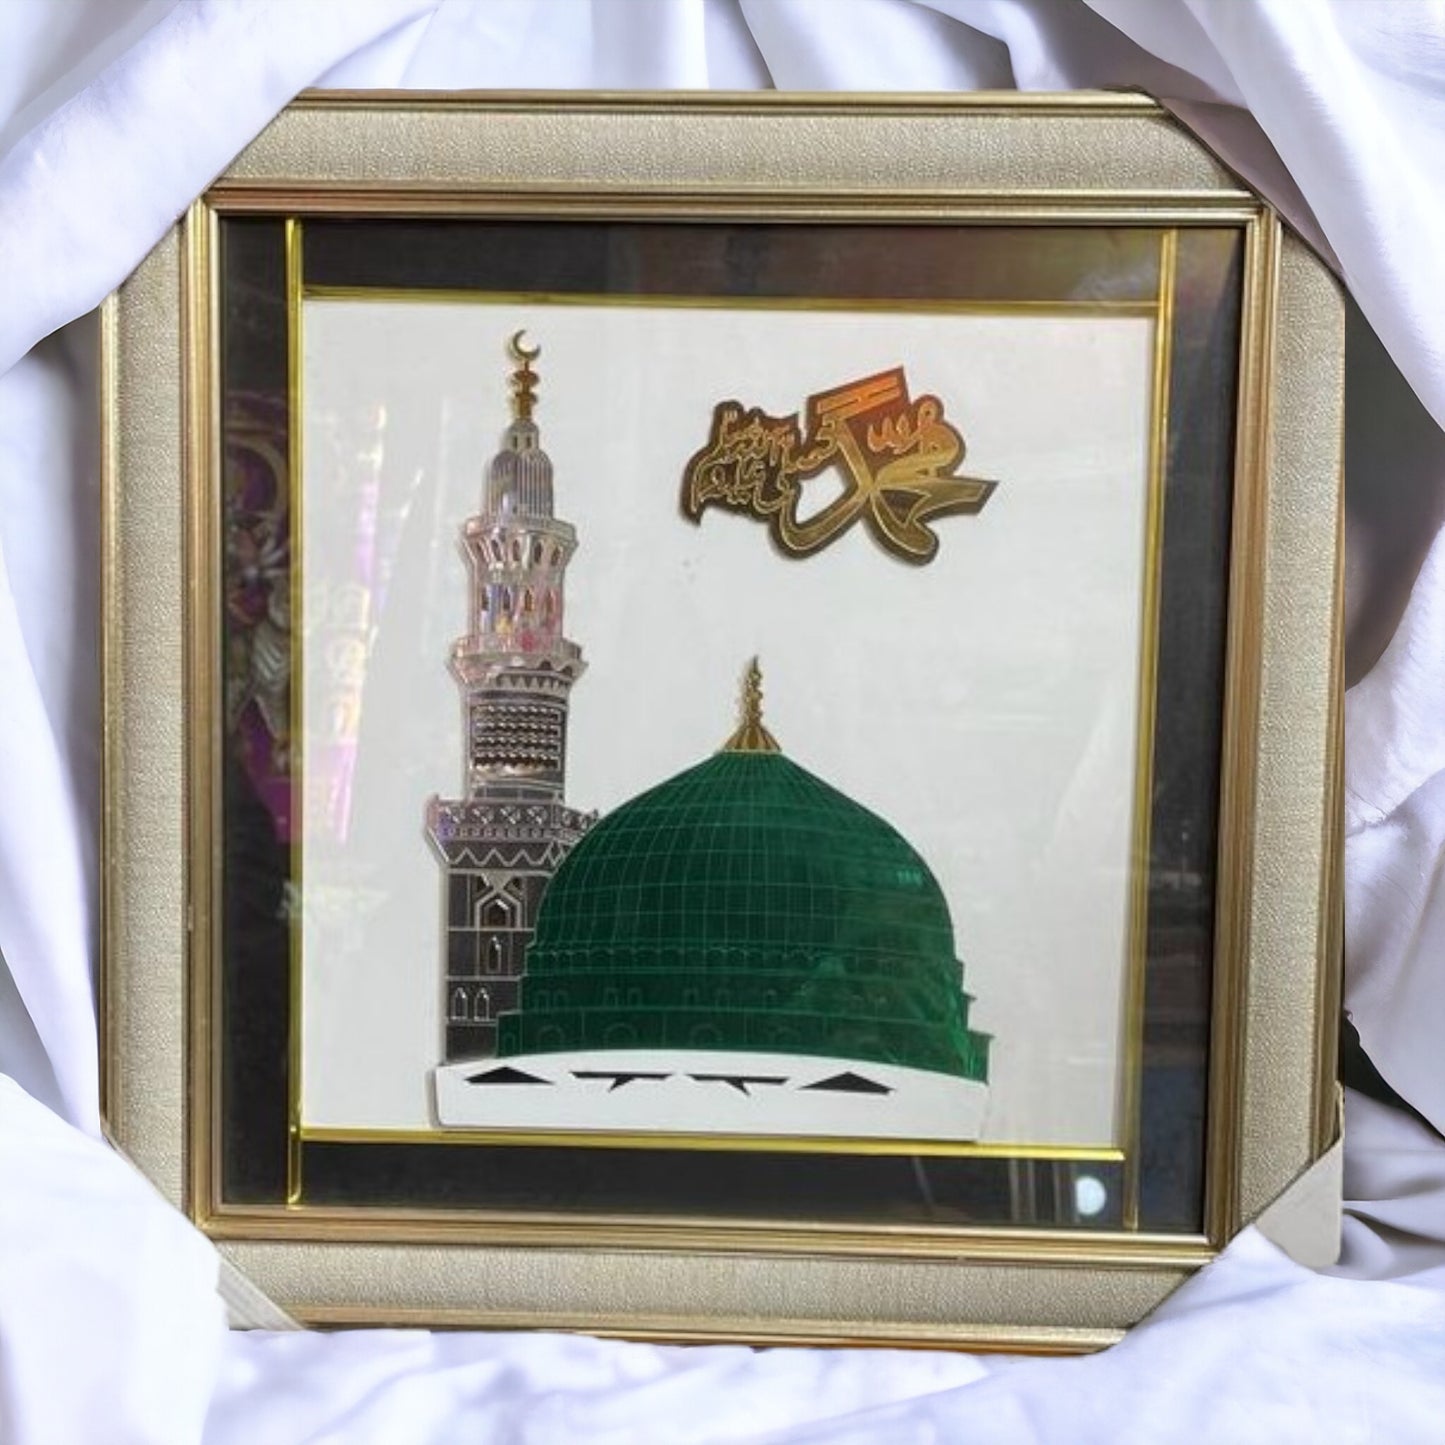 Buy or send Framed Glass Cut - Al Masjid An Nabawi online with delivery from Bakers Wagon